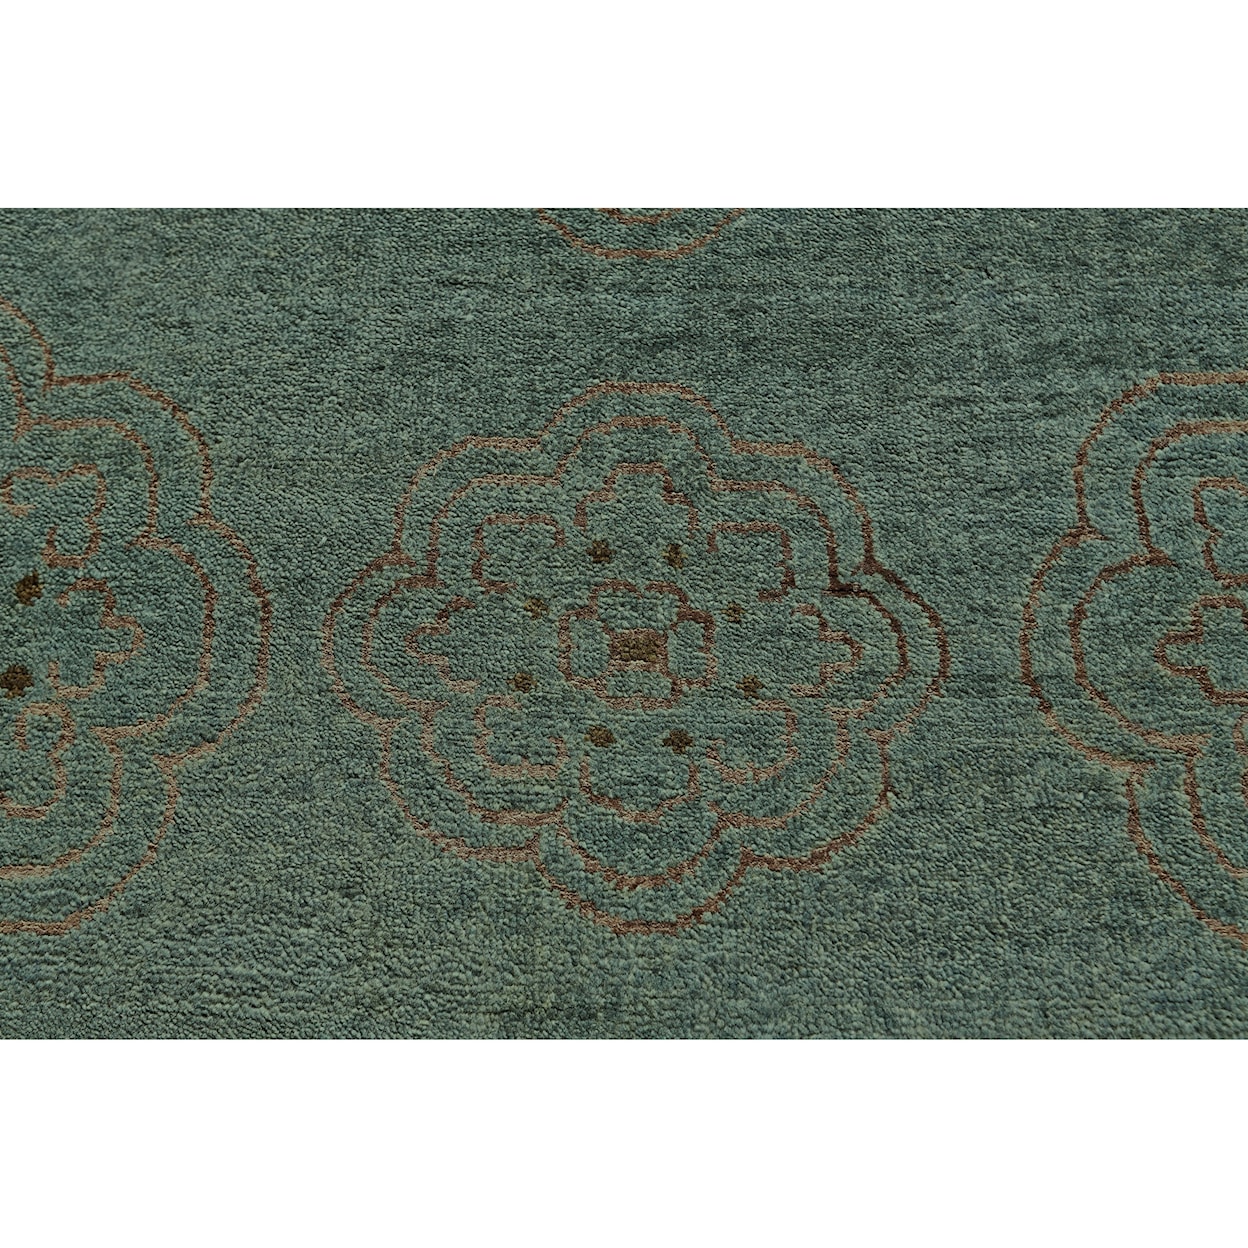 Feizy Rugs Qing Teal 9'-6" x 13'-6" Area Rug